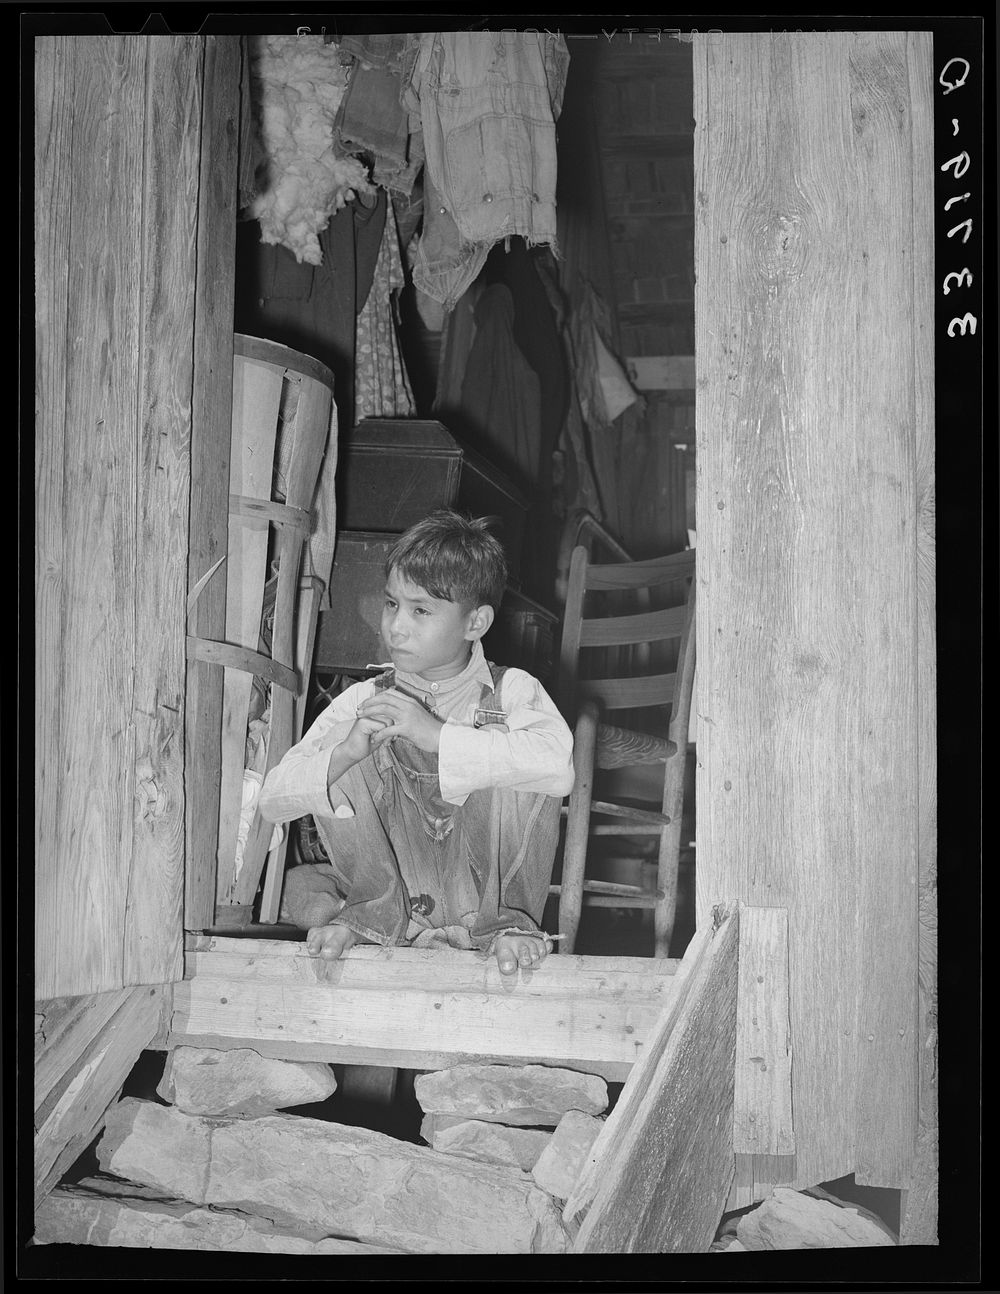 Indian child "hunkering down" in doorway of farm home near Sallisaw, Oklahoma. Hunkering down is an Indian slang term for…